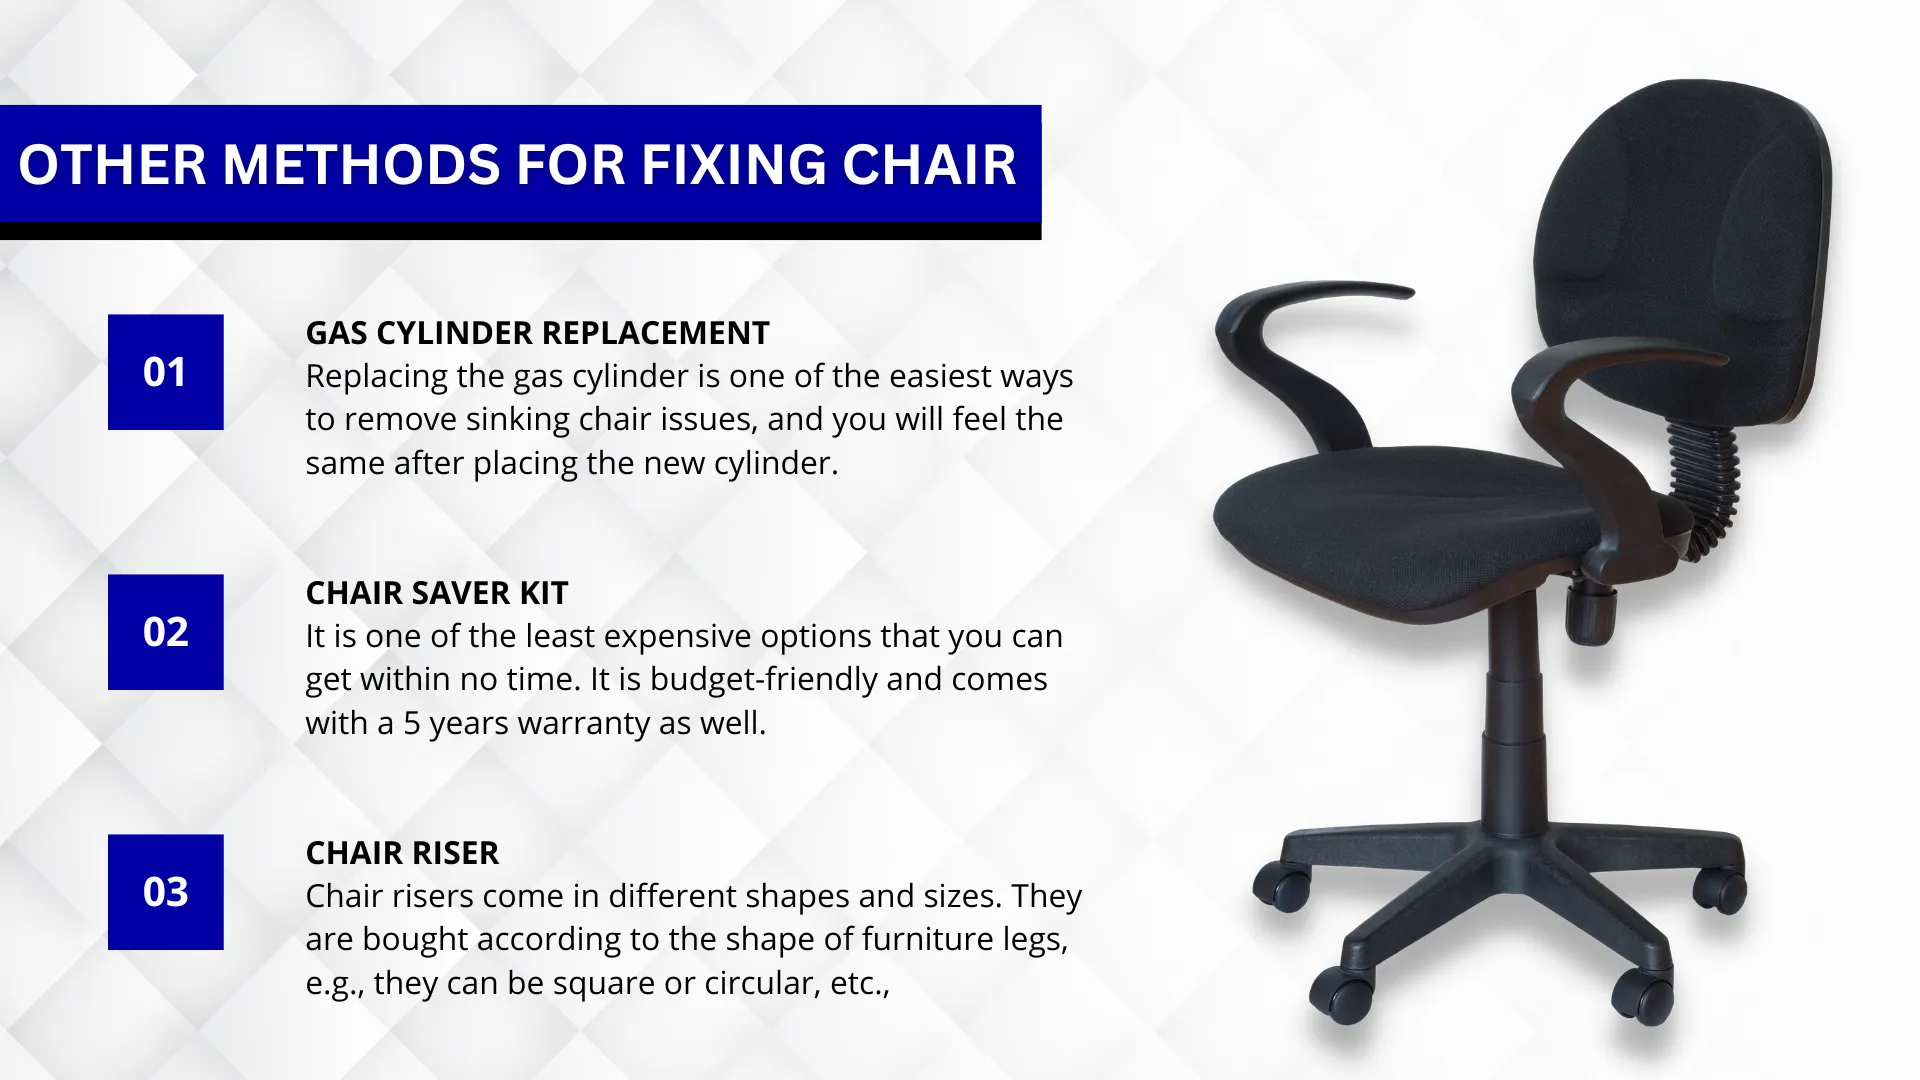 Other Methods for Fixing Chair